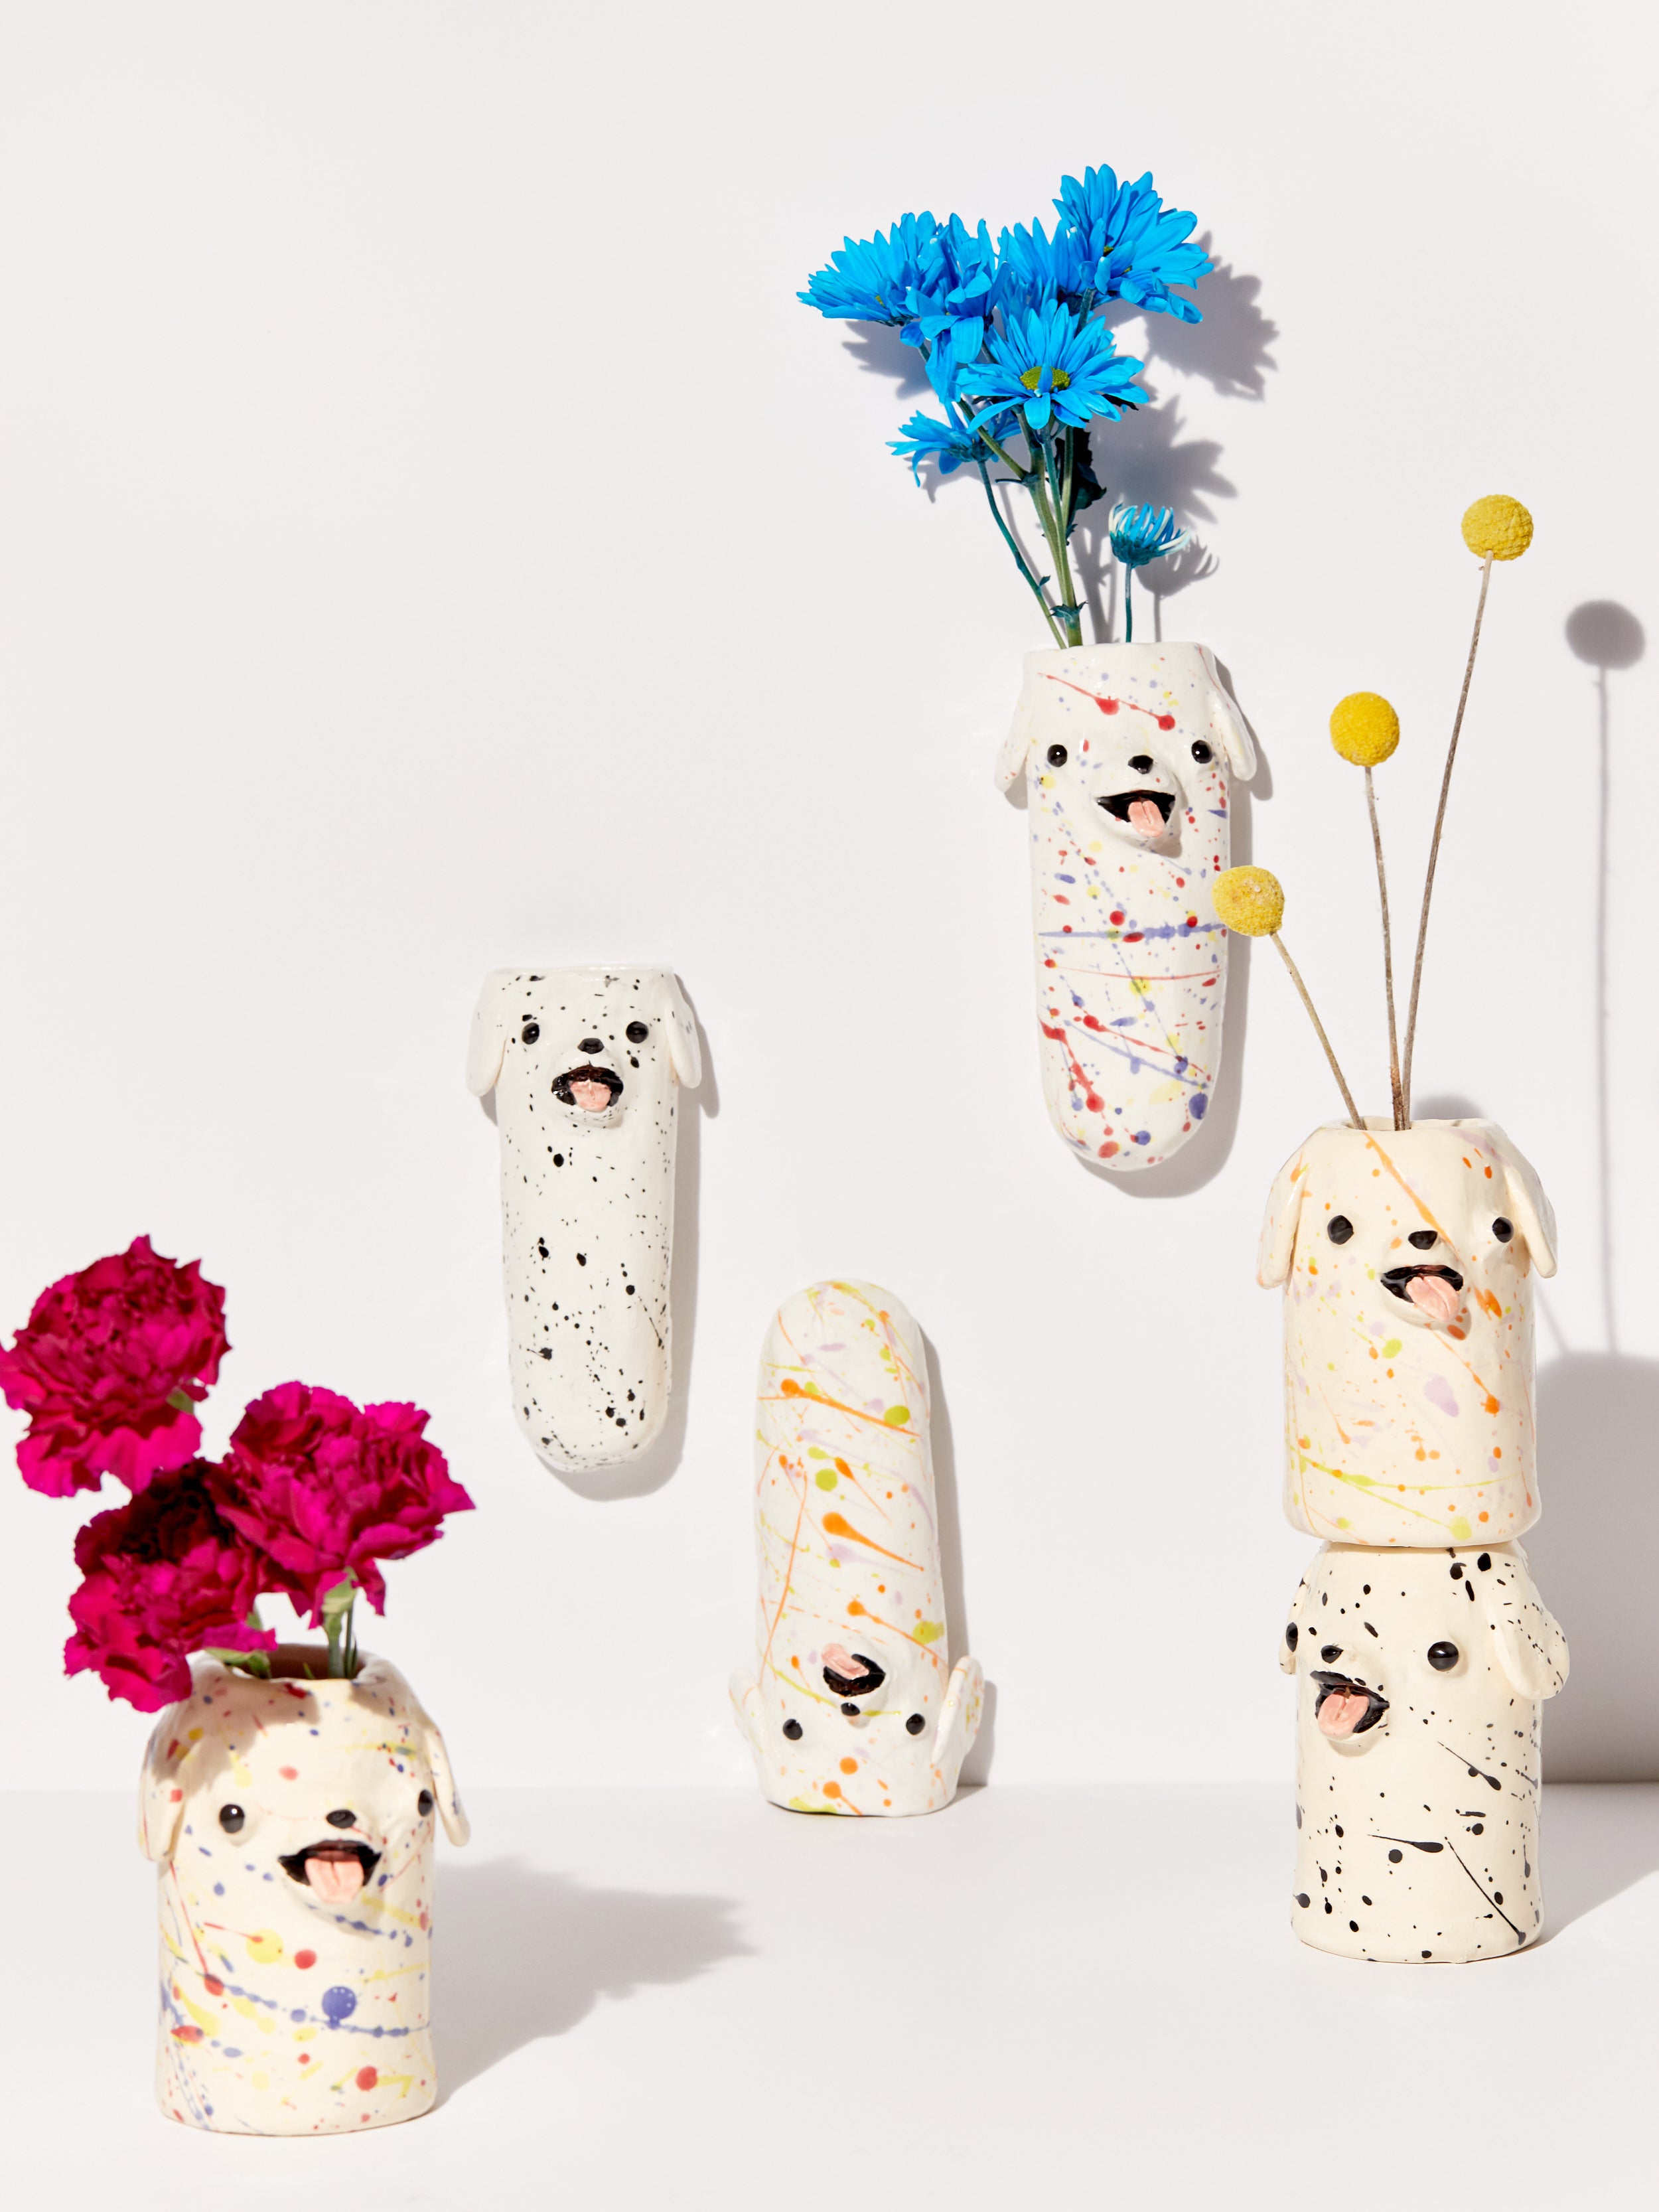 These Urban Outfitters Vases Sold Out in 2 Days Last Year—Now They’re Back